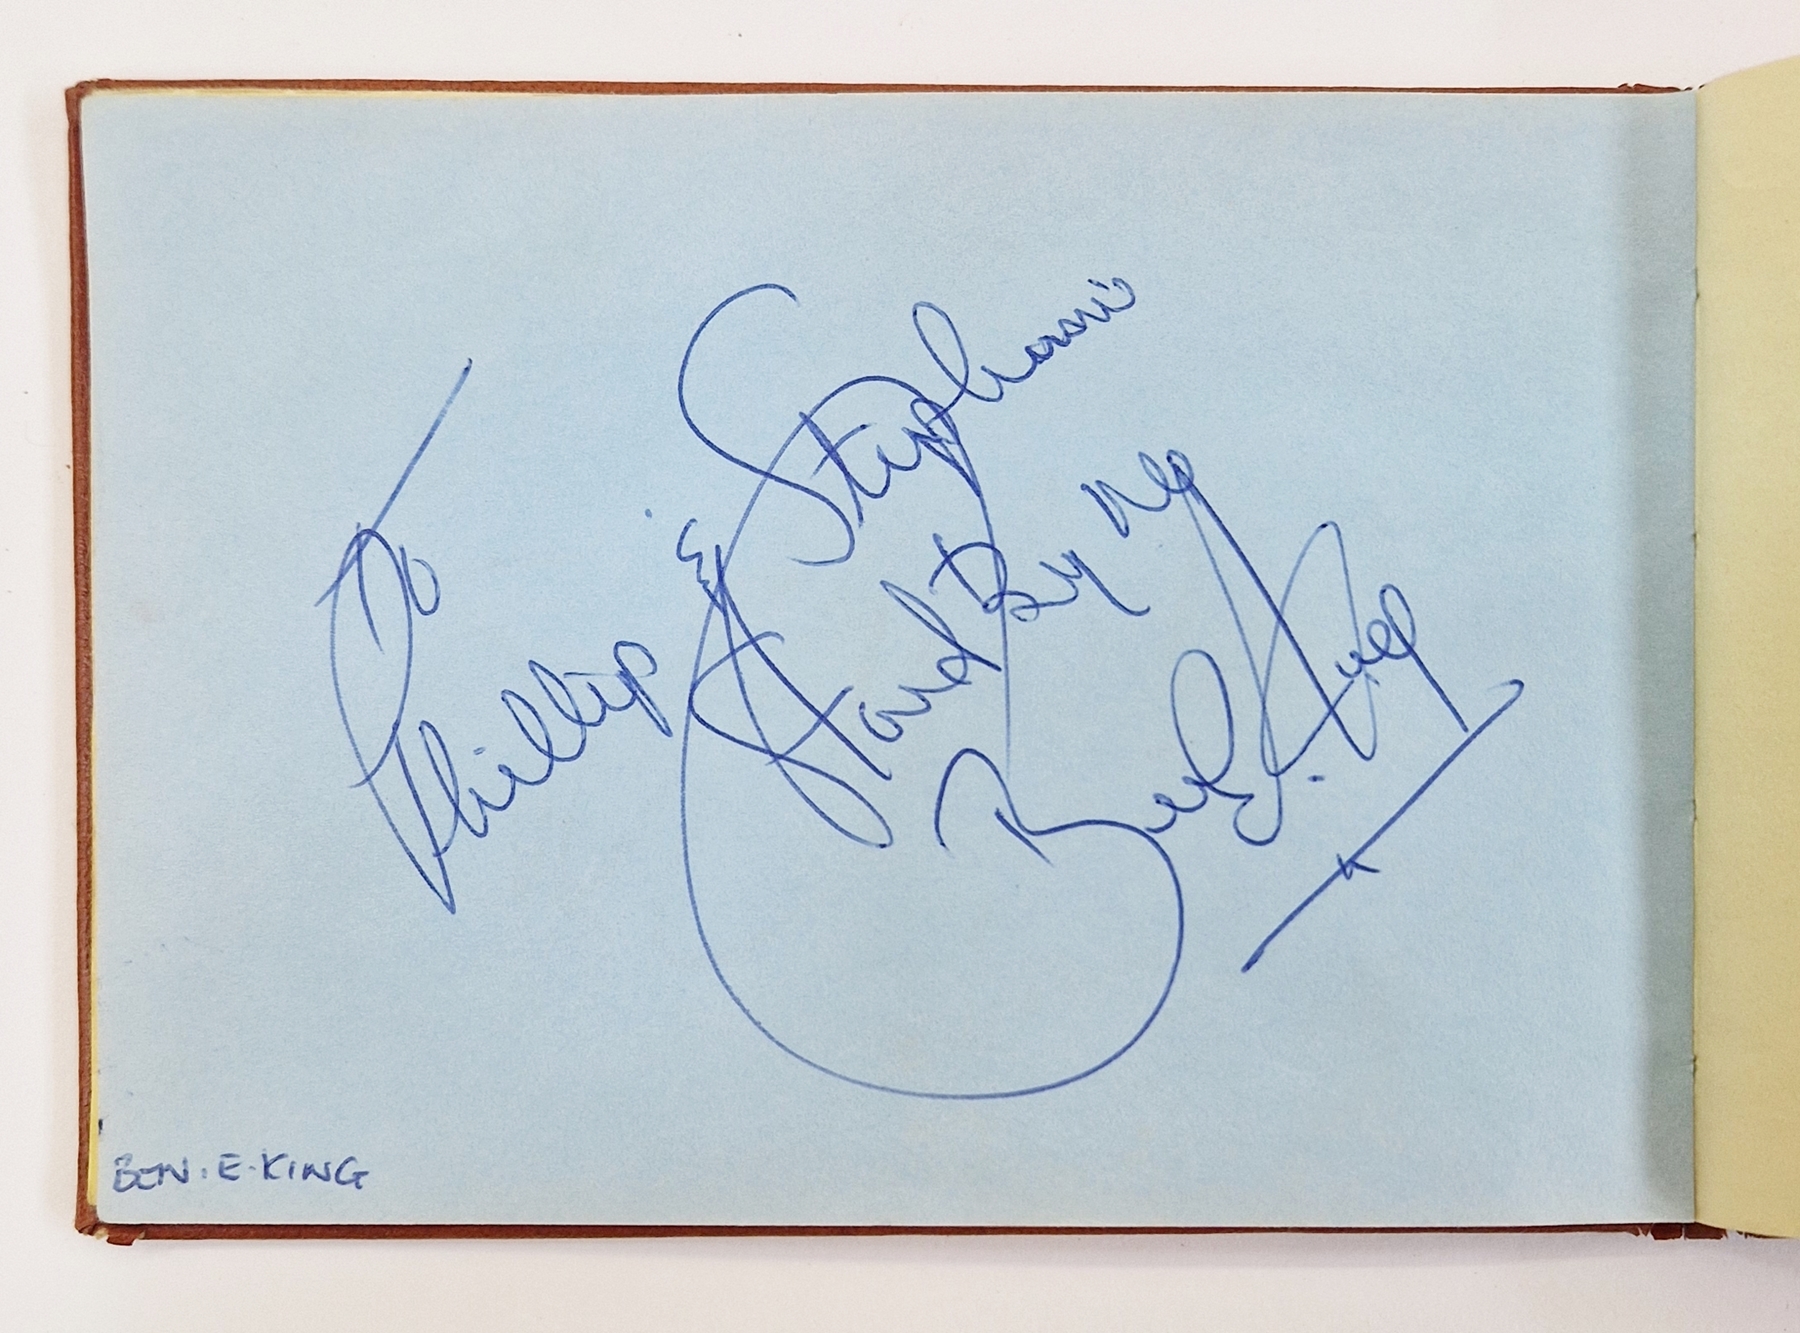 Autograph album, 20th century, to include actors, singers and other celebrities, including Elton - Image 14 of 20